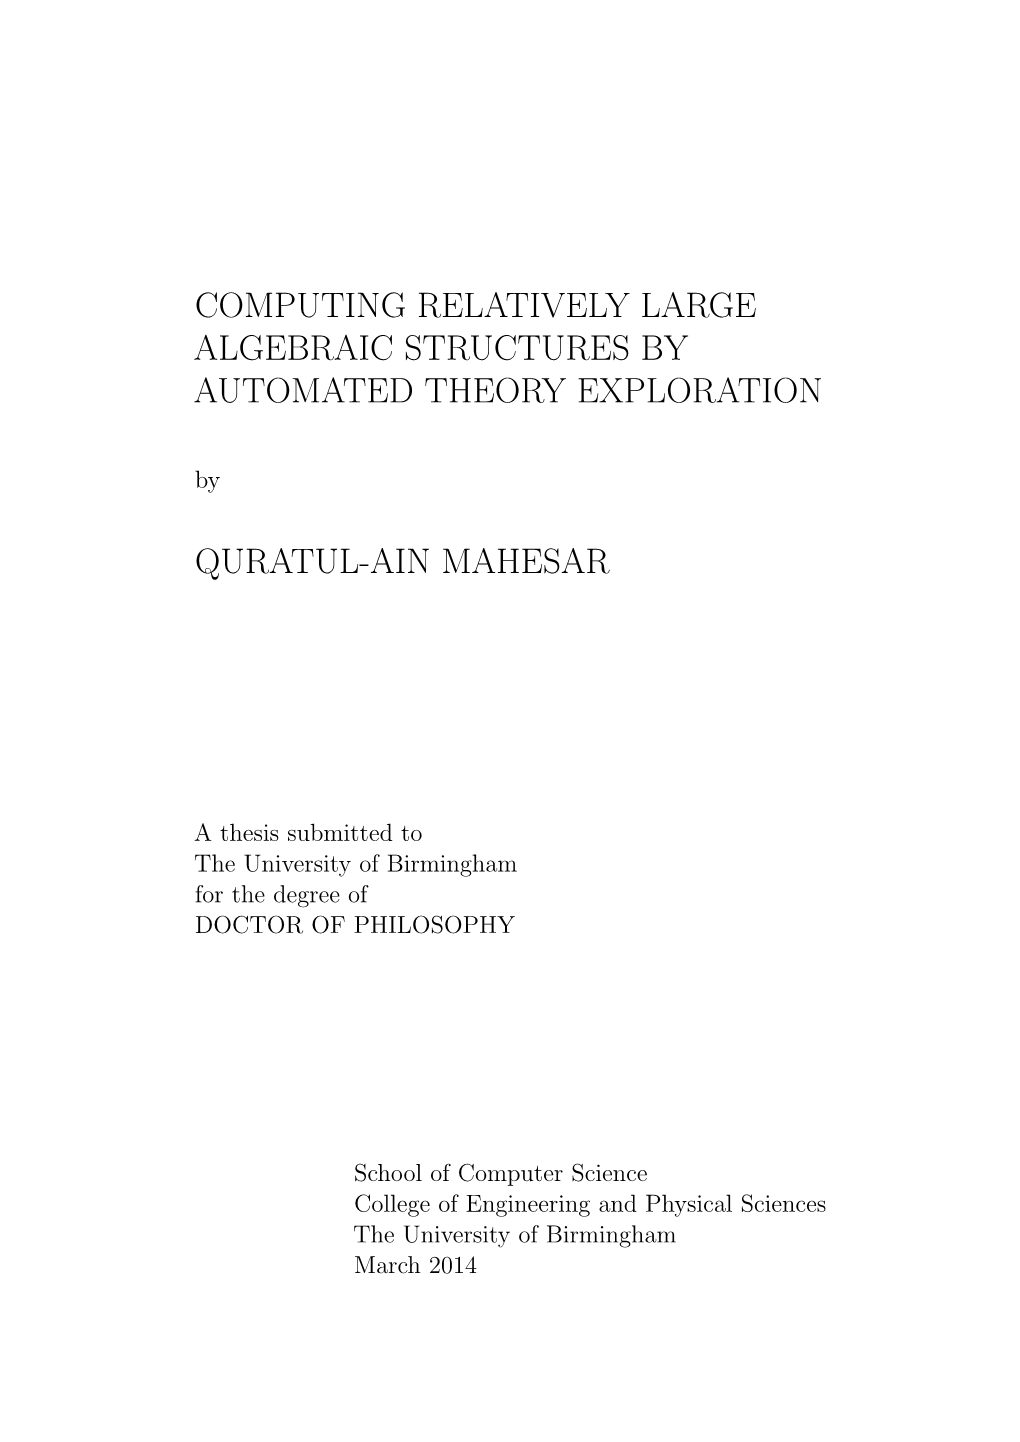 COMPUTING RELATIVELY LARGE ALGEBRAIC STRUCTURES by AUTOMATED THEORY EXPLORATION By